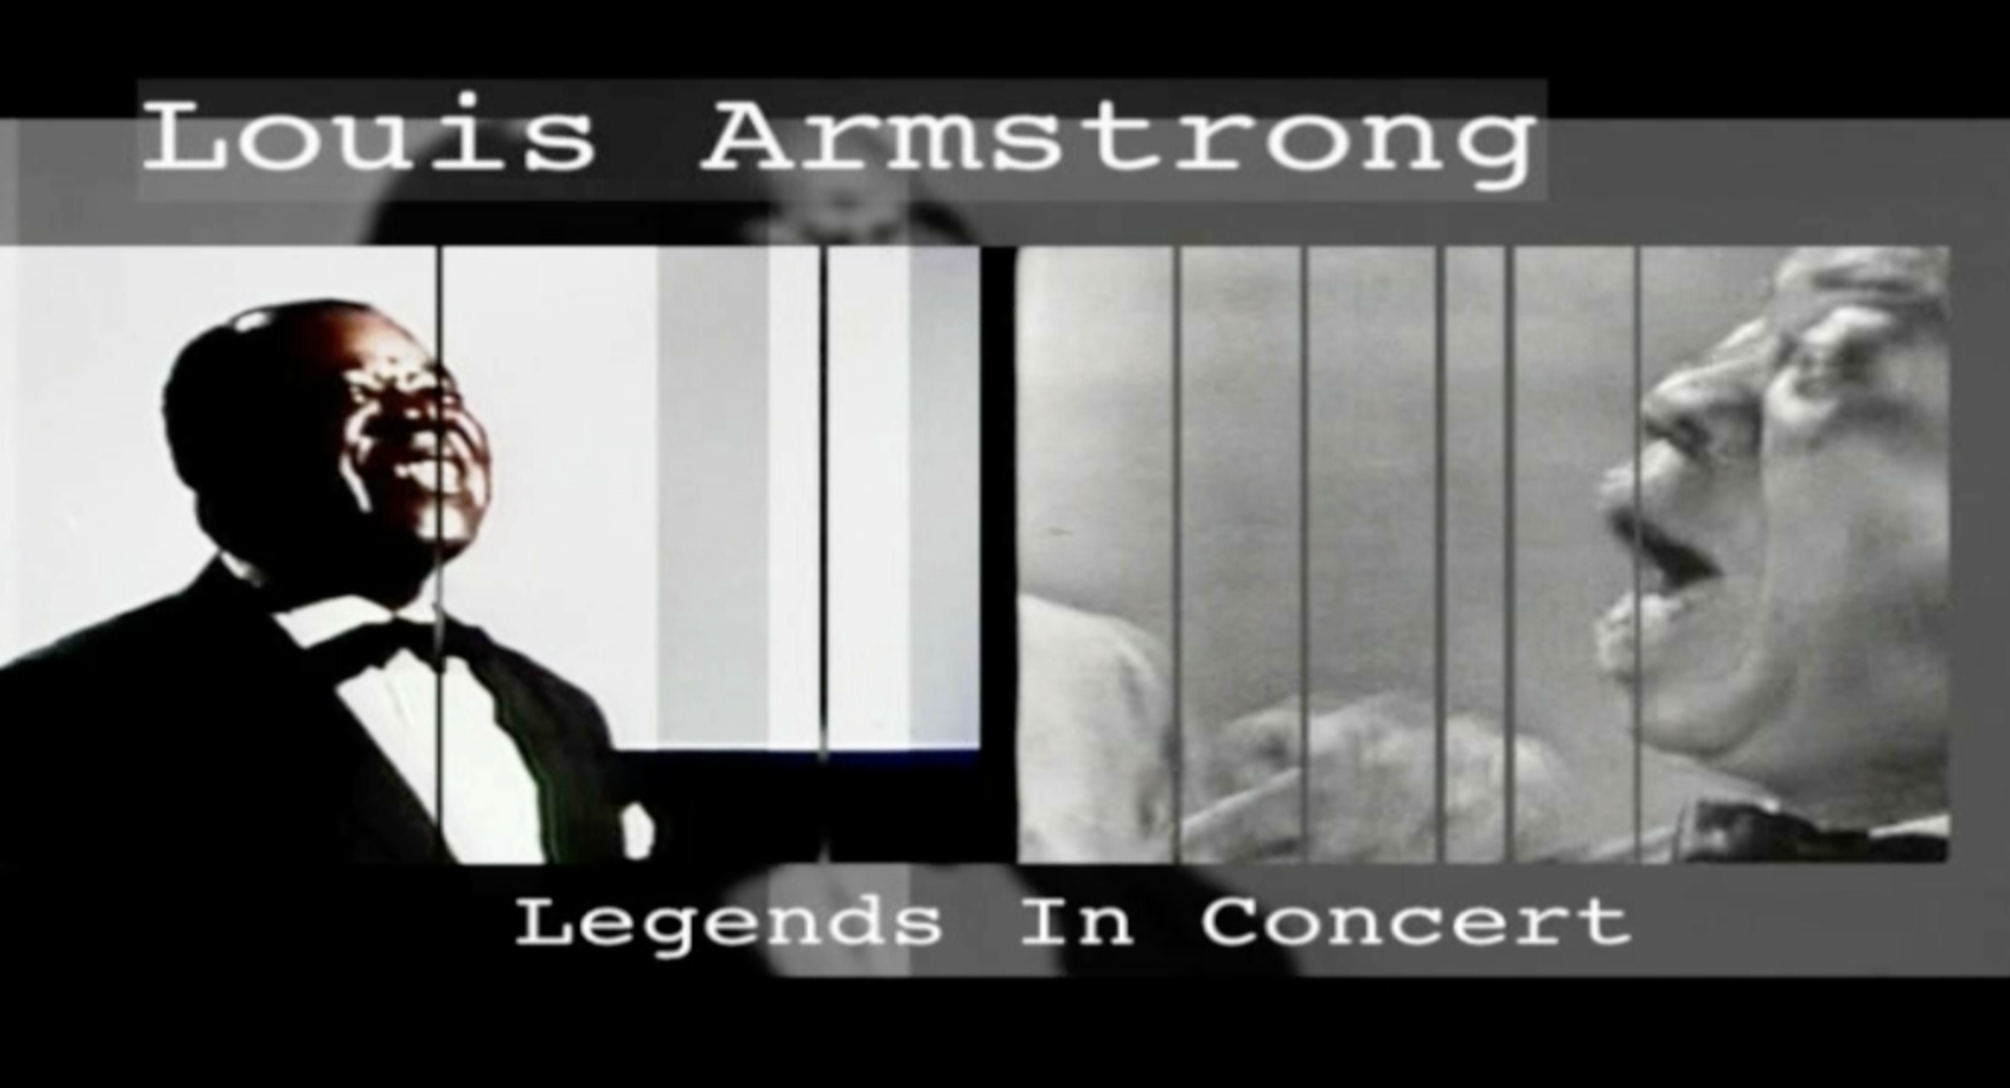 Louis Armstrong - Legend in Concert